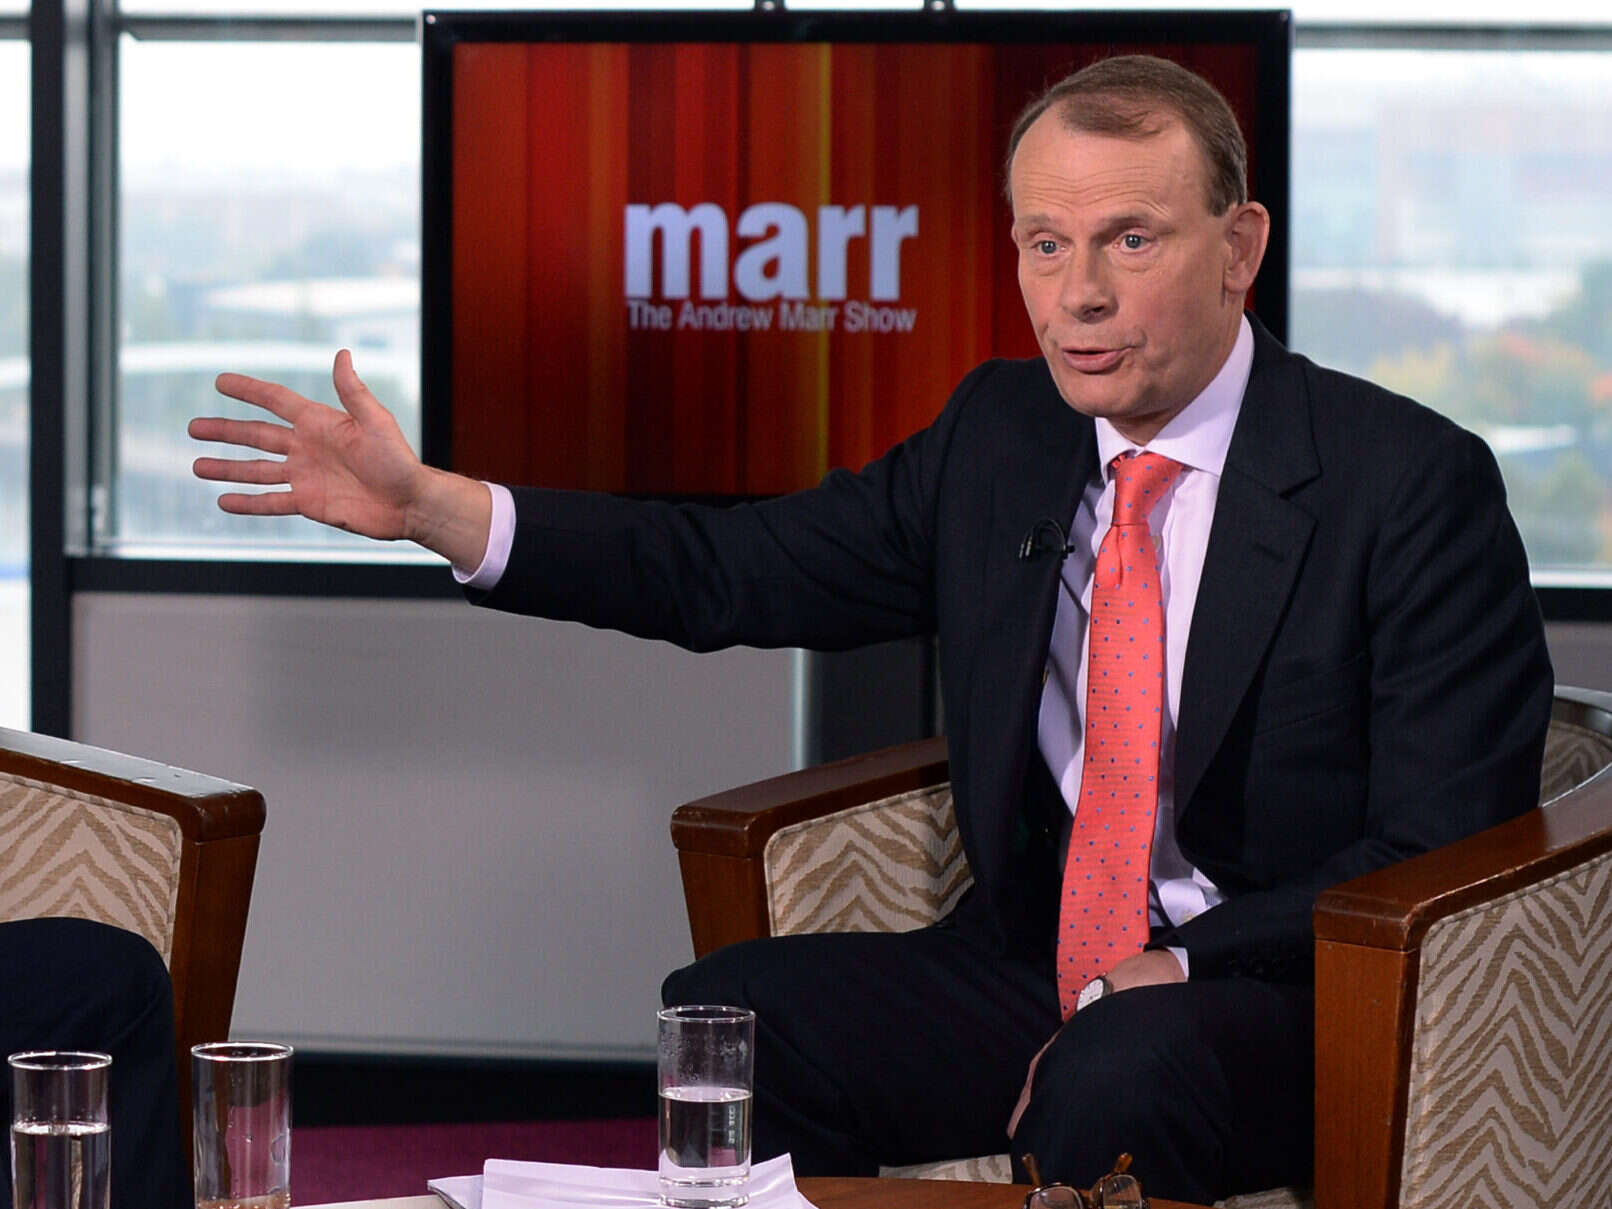 Andrew Marr goes from BBC star to newbie reporter: ‘I want the notebook in my back pocket’